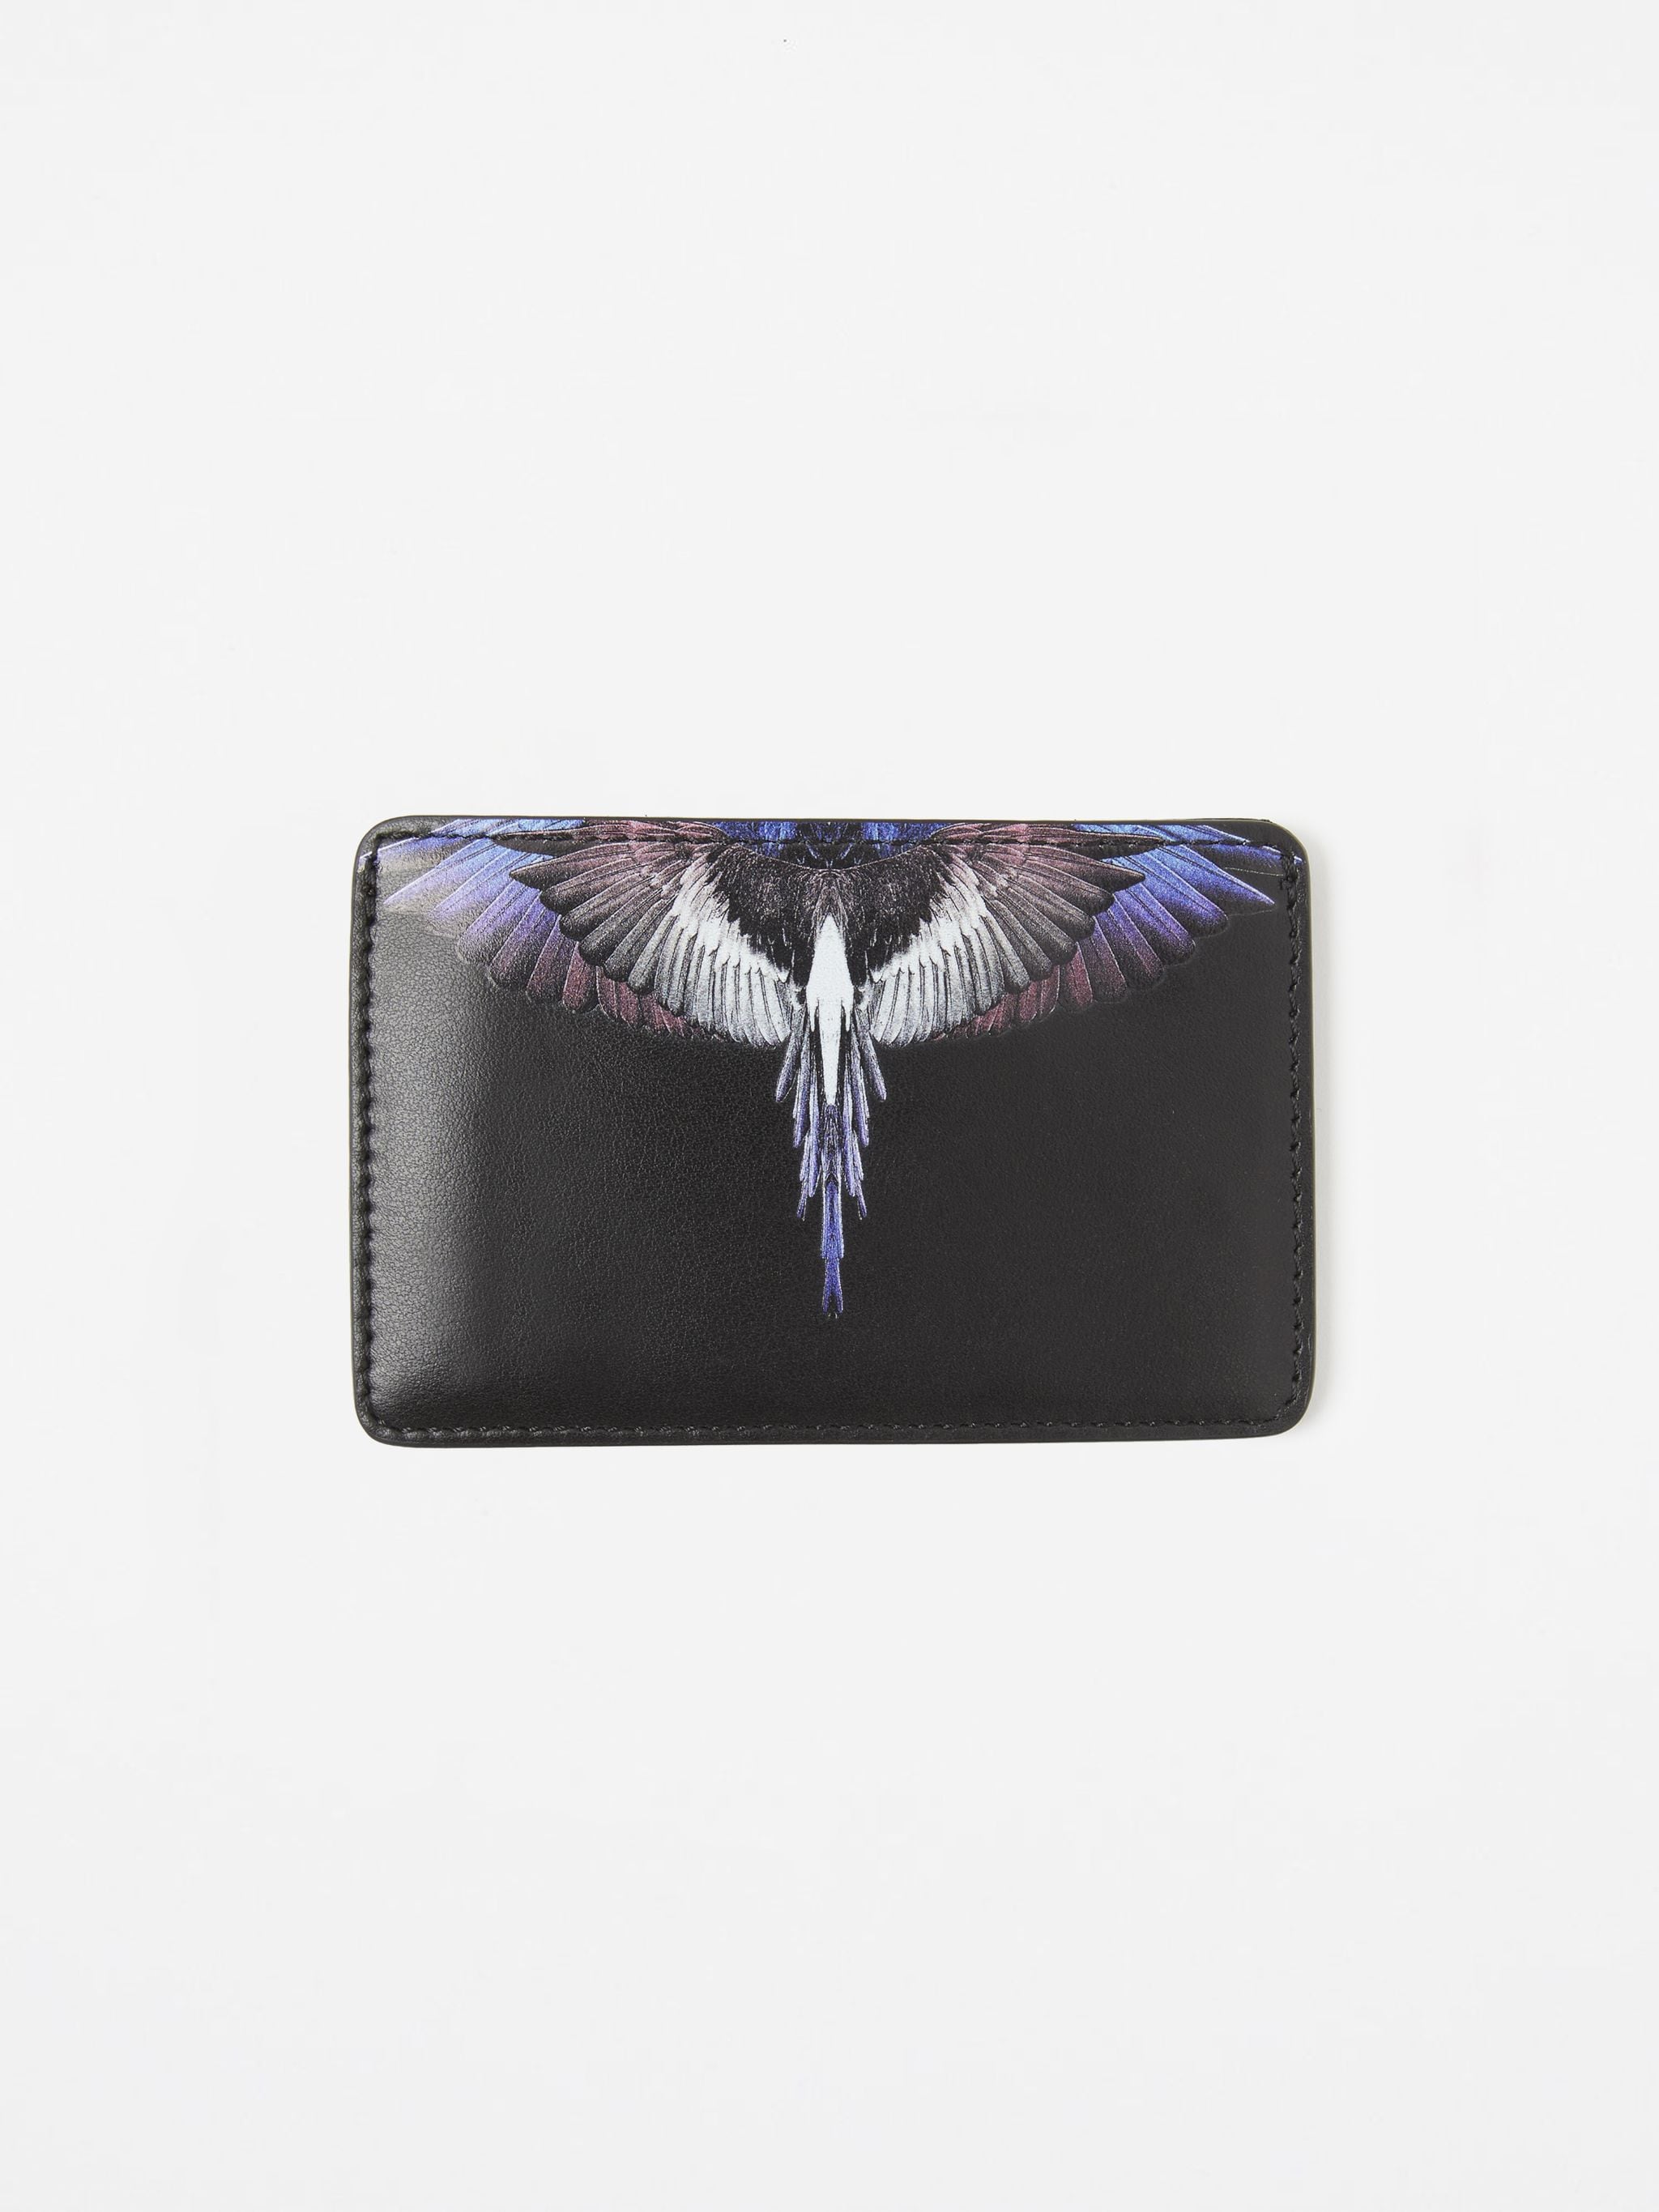 Black leather Wings leather cardholder from Marcelo Burlon County of Milan featuring wings print, debossed logo and card slots.